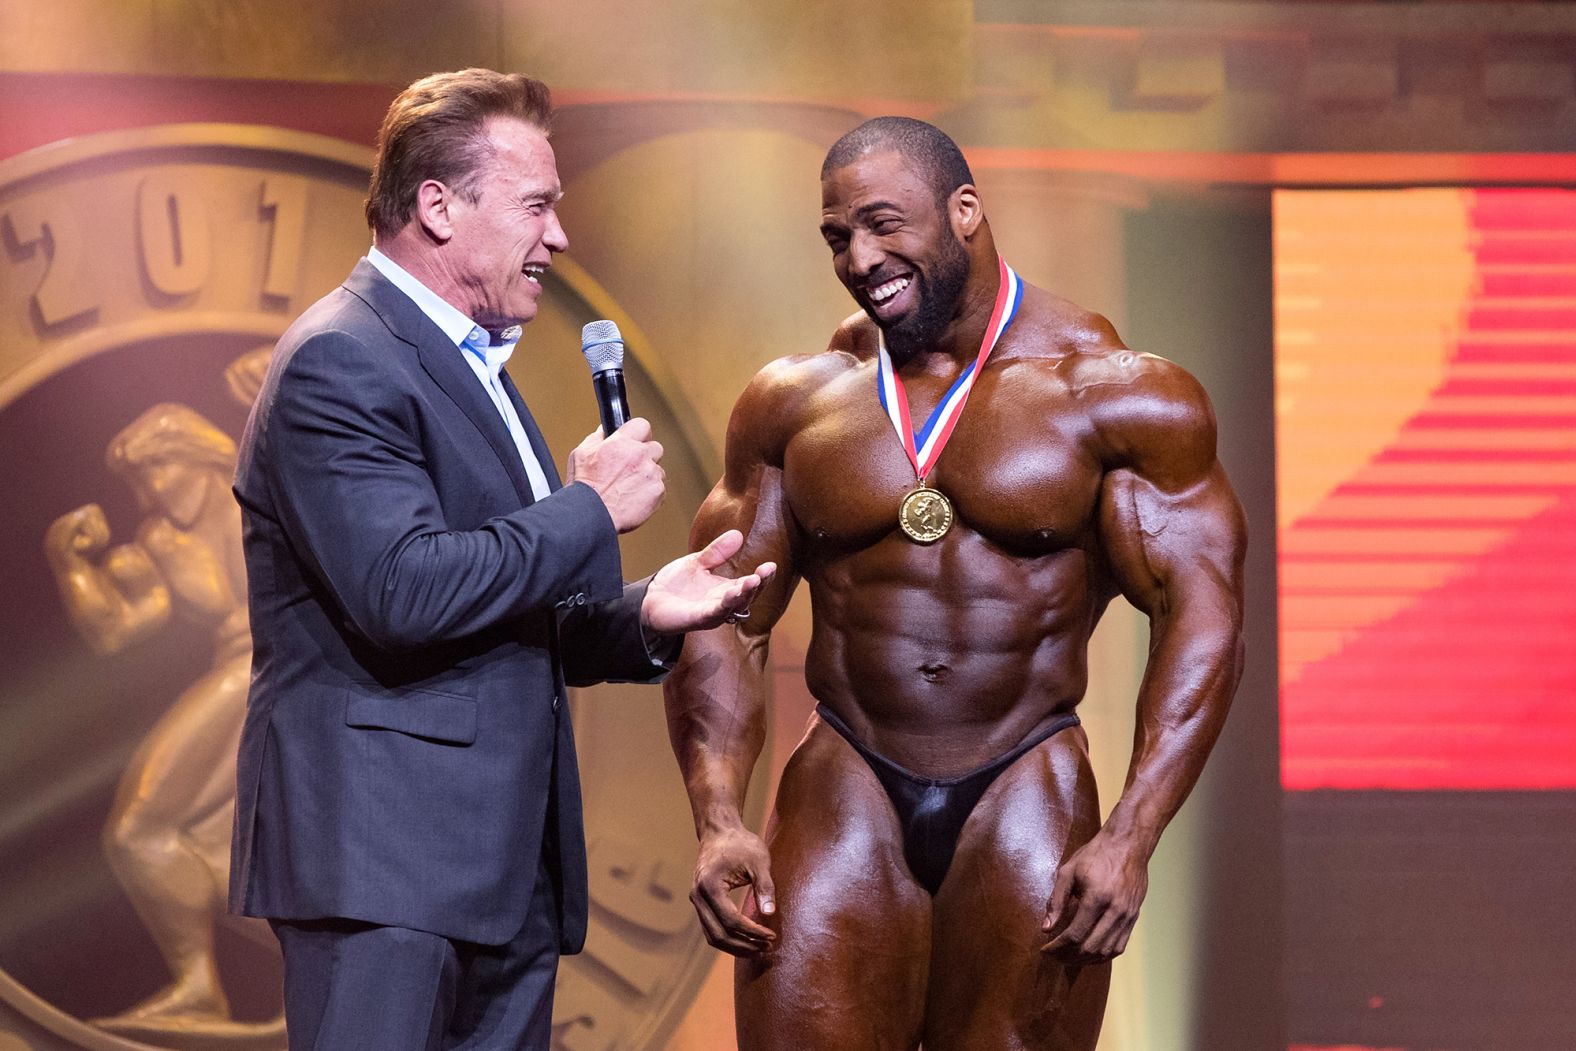 Star bodybuilder <a href="index.php?page=&url=https%3A%2F%2Fwww.cnn.com%2F2022%2F04%2F13%2Fsport%2Fcedric-mcmillan-death-scli-intl-spt%2Findex.html" target="_blank">Cedric McMillan,</a> seen here being interviewed by Arnold Schwarzenegger, died at the age of 44, his sponsor confirmed on April 12. McMillan won multiple titles during his career, including the 2017 Arnold Classic. No further details were released about his death.